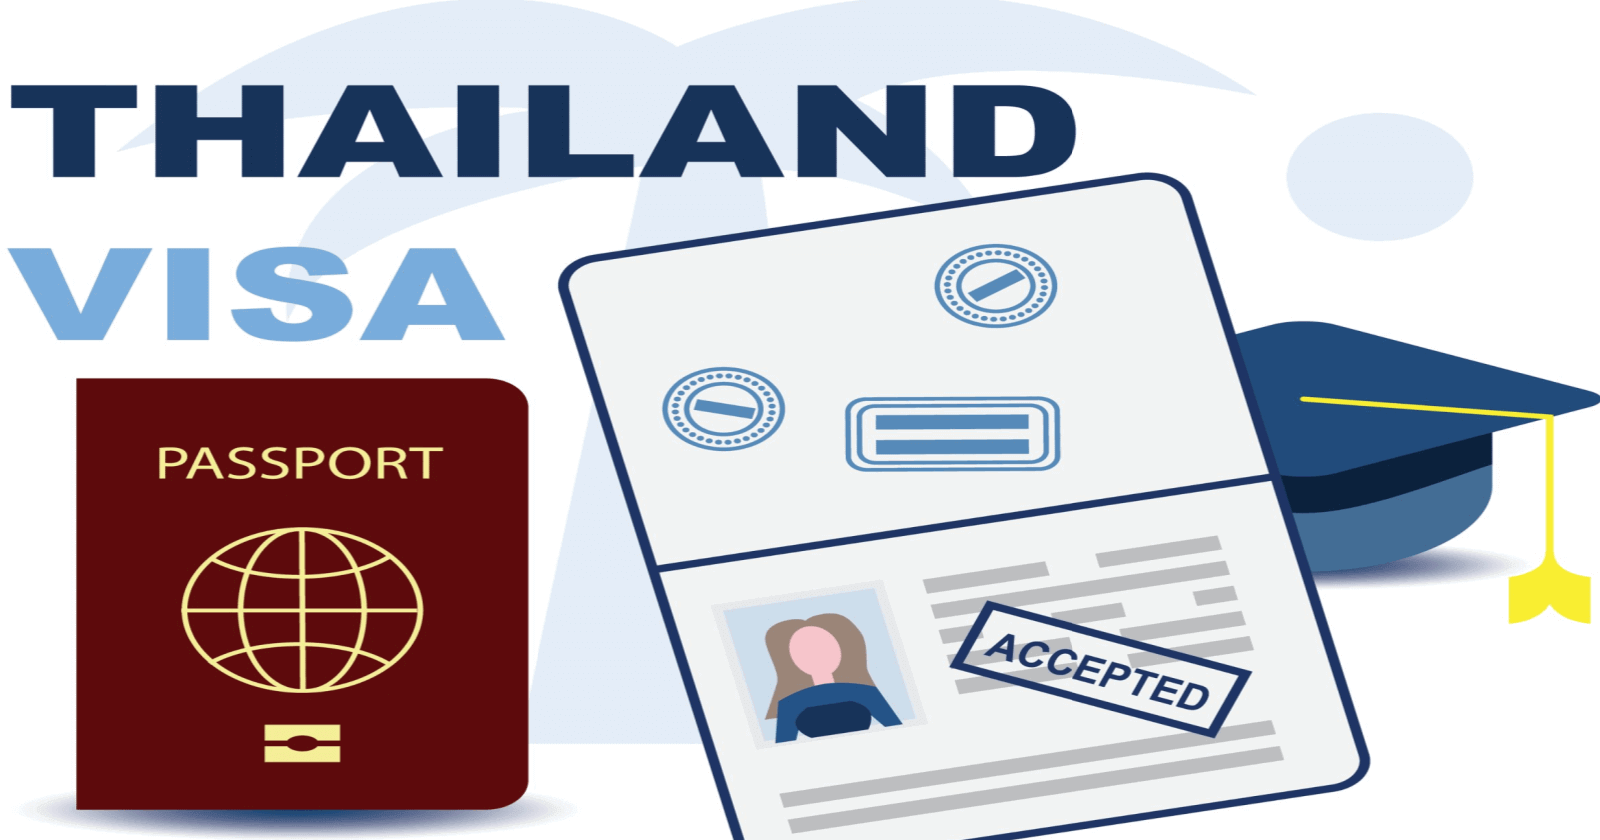 thailand tourist visa cost for indian